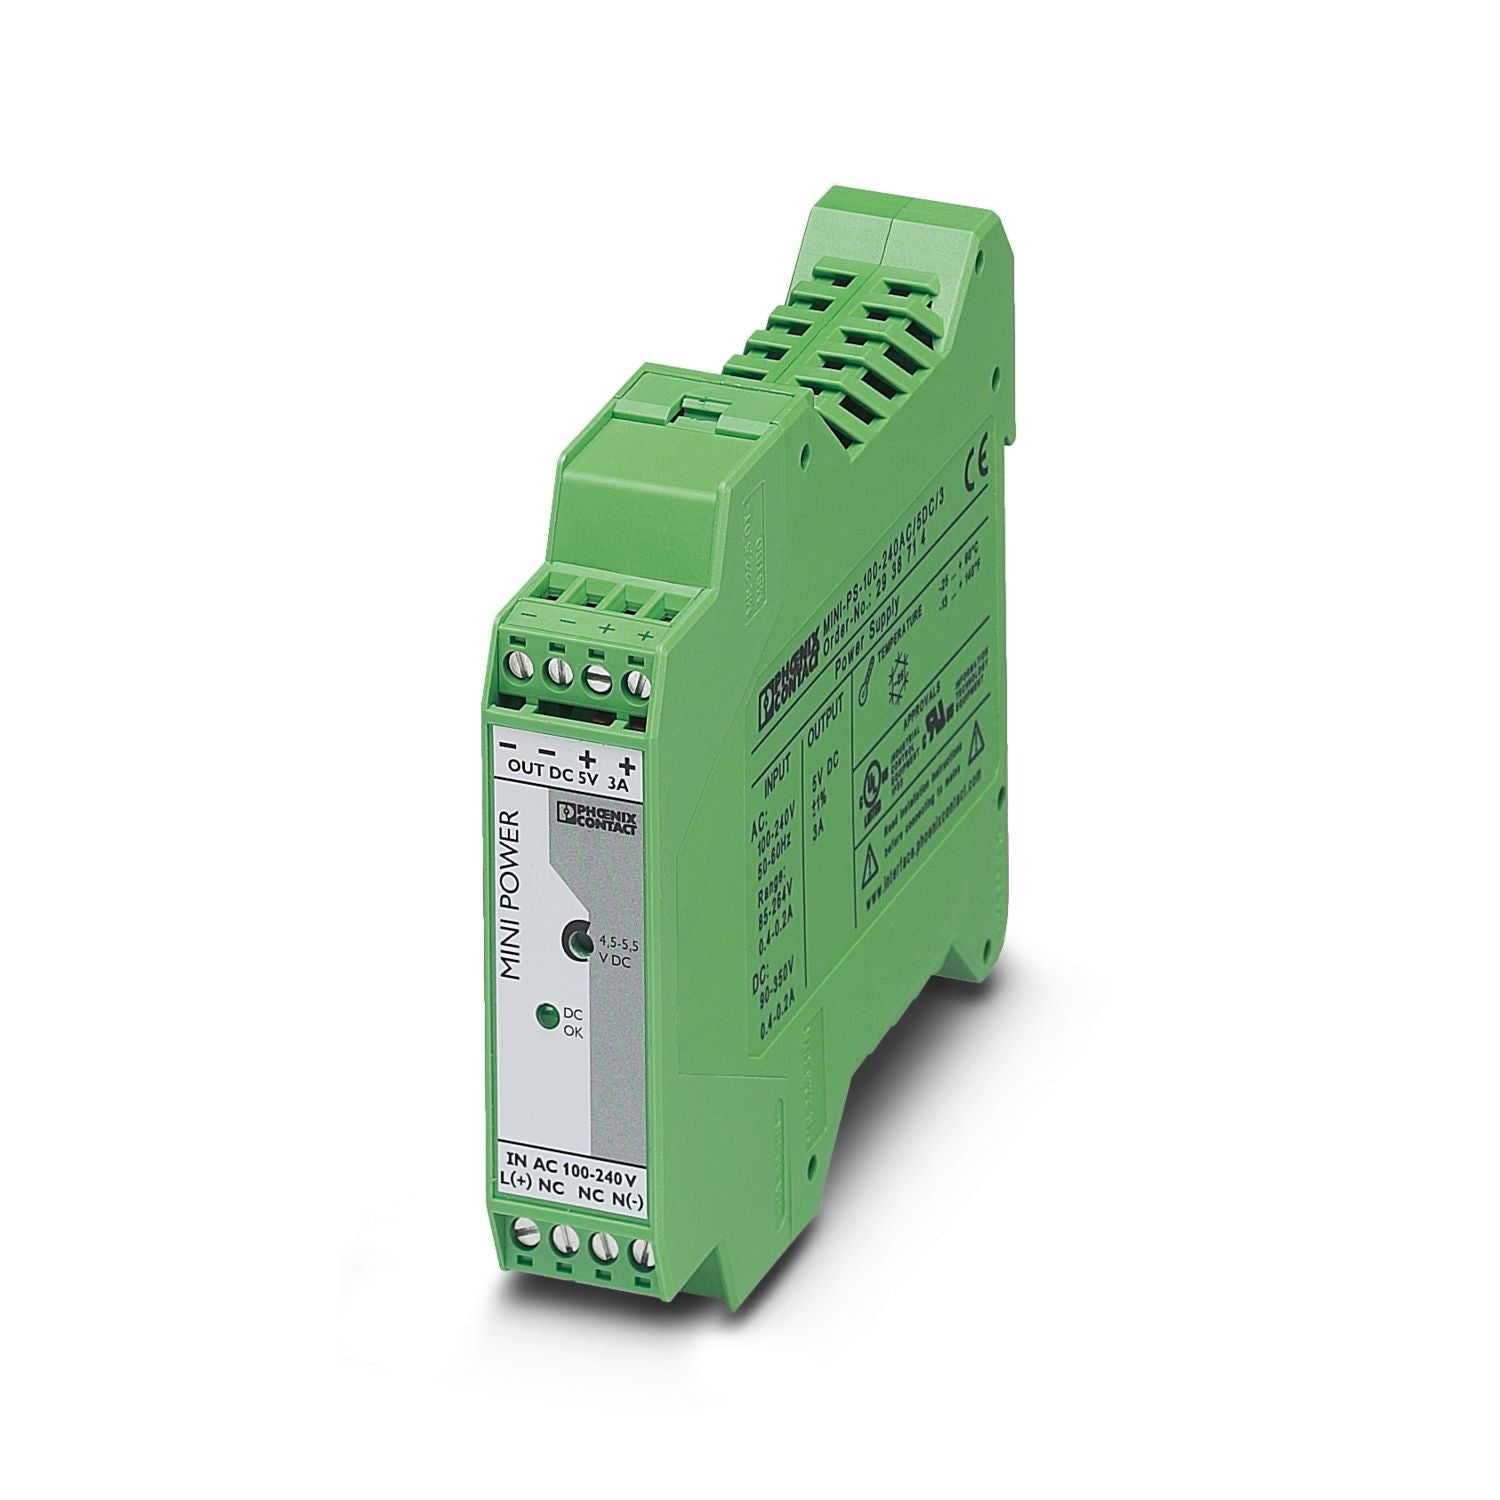 2938714 | Phoenix Contact Power Supply, AC-DC,5V, 3A, 85-264V In, Enclosed, DIN Rail, Industrial, 15W, MINI Series